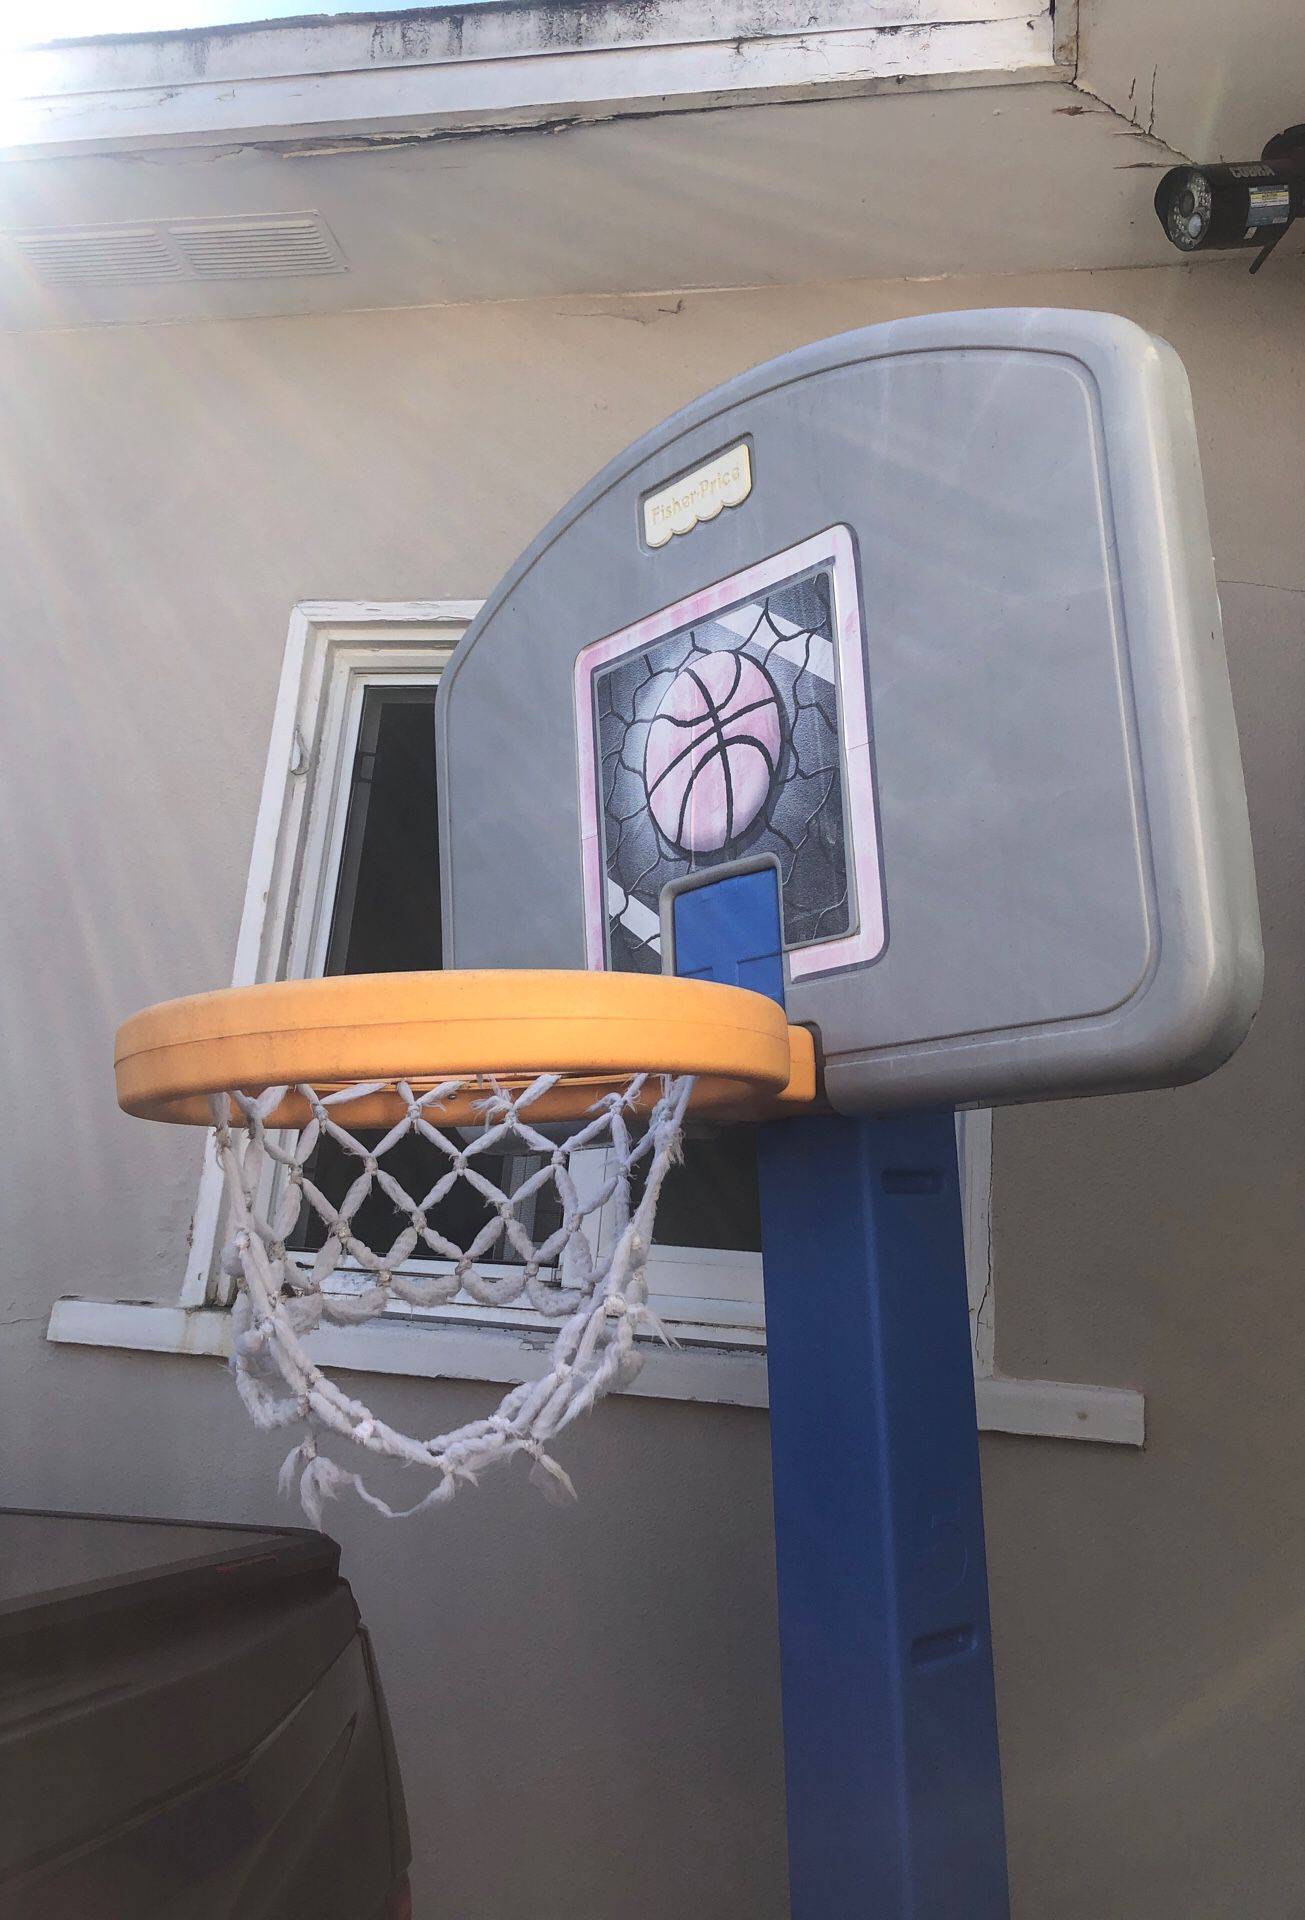 Kids basketball hoop moving must sell today!